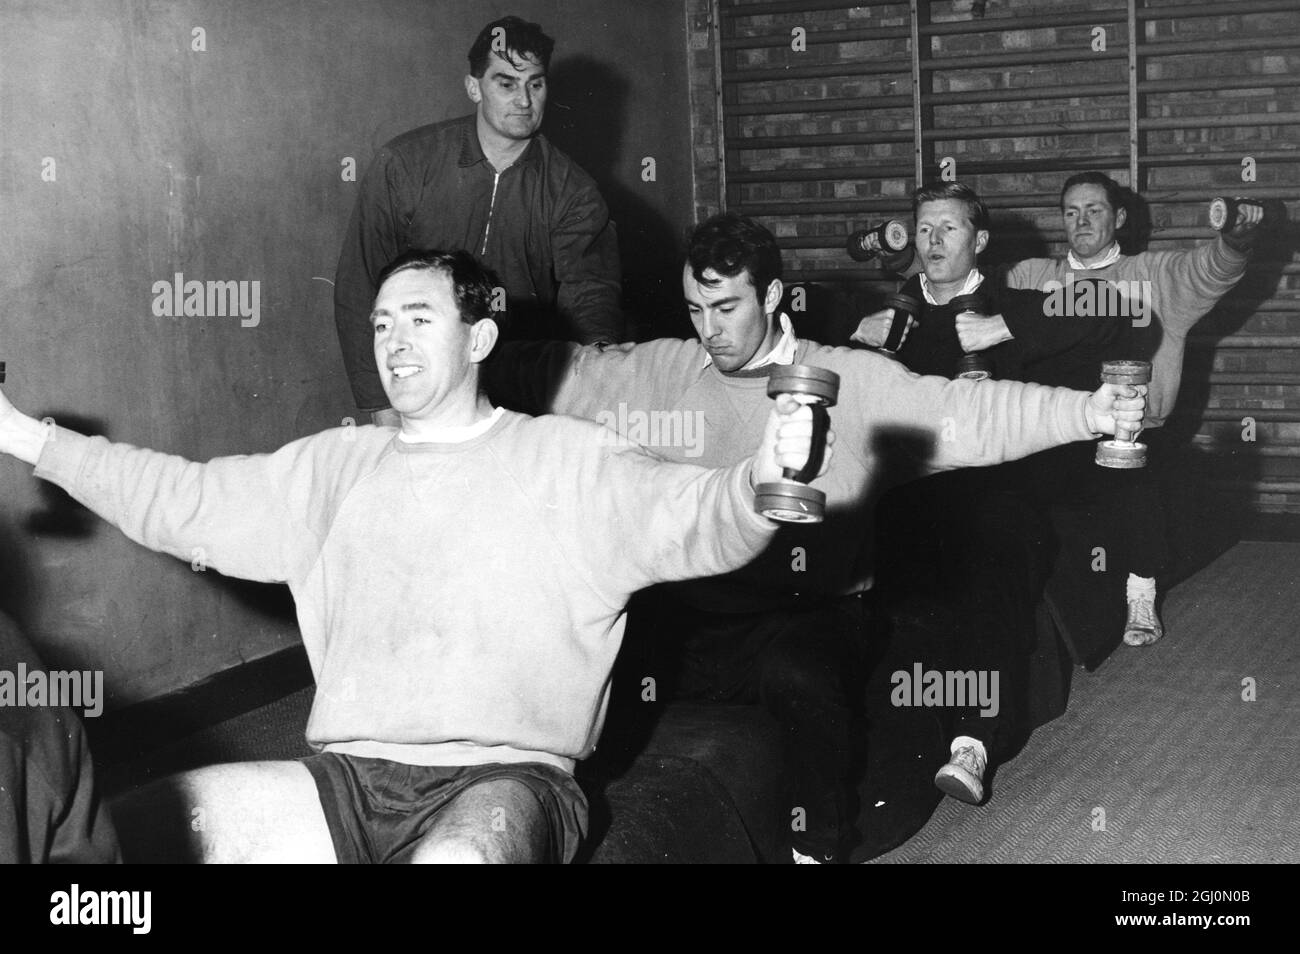 Tottenham Hotspur FC , now back in training with new team member Jimmy Greaves , after his recent transfer from Milan . Training under the watchfull eye of weight lifting expert Bill Watson , from front ; team Captain , Danny Blanchflower , the new club member Jimmy Greaves , Peter Baker and Les Allen . 8th December 1961 Stock Photo